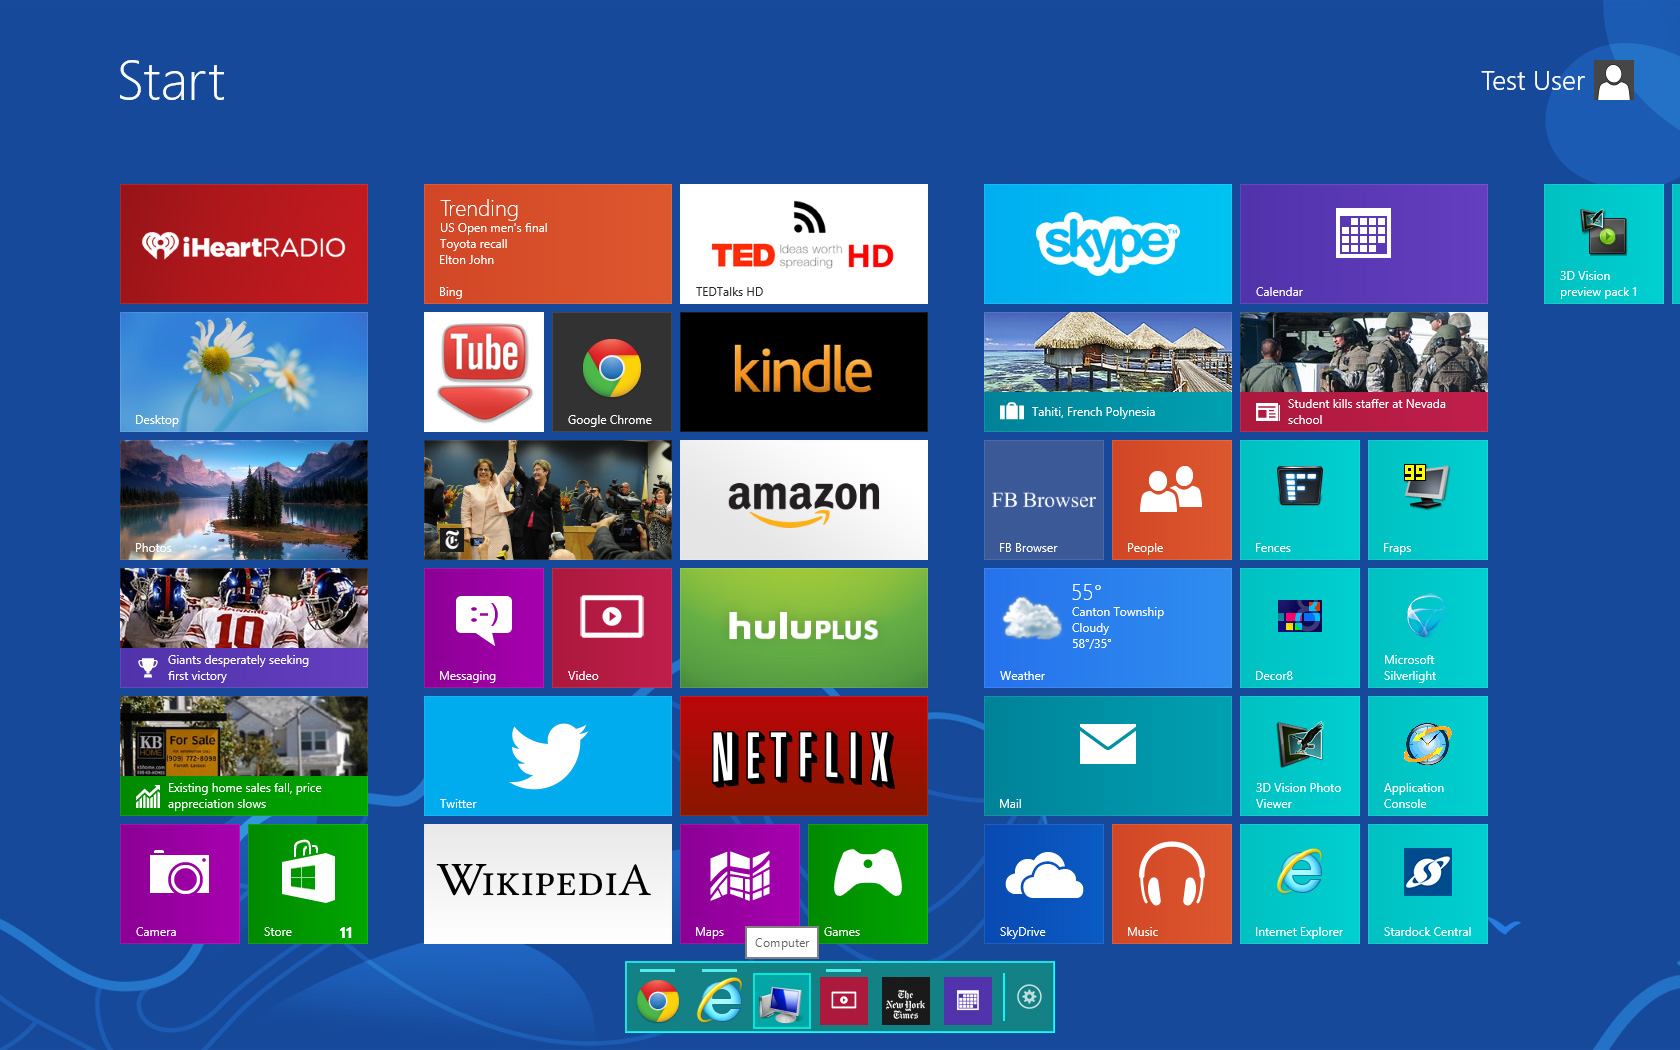 Launch8 adds a stationary dock to your Windows 8 Start screen.